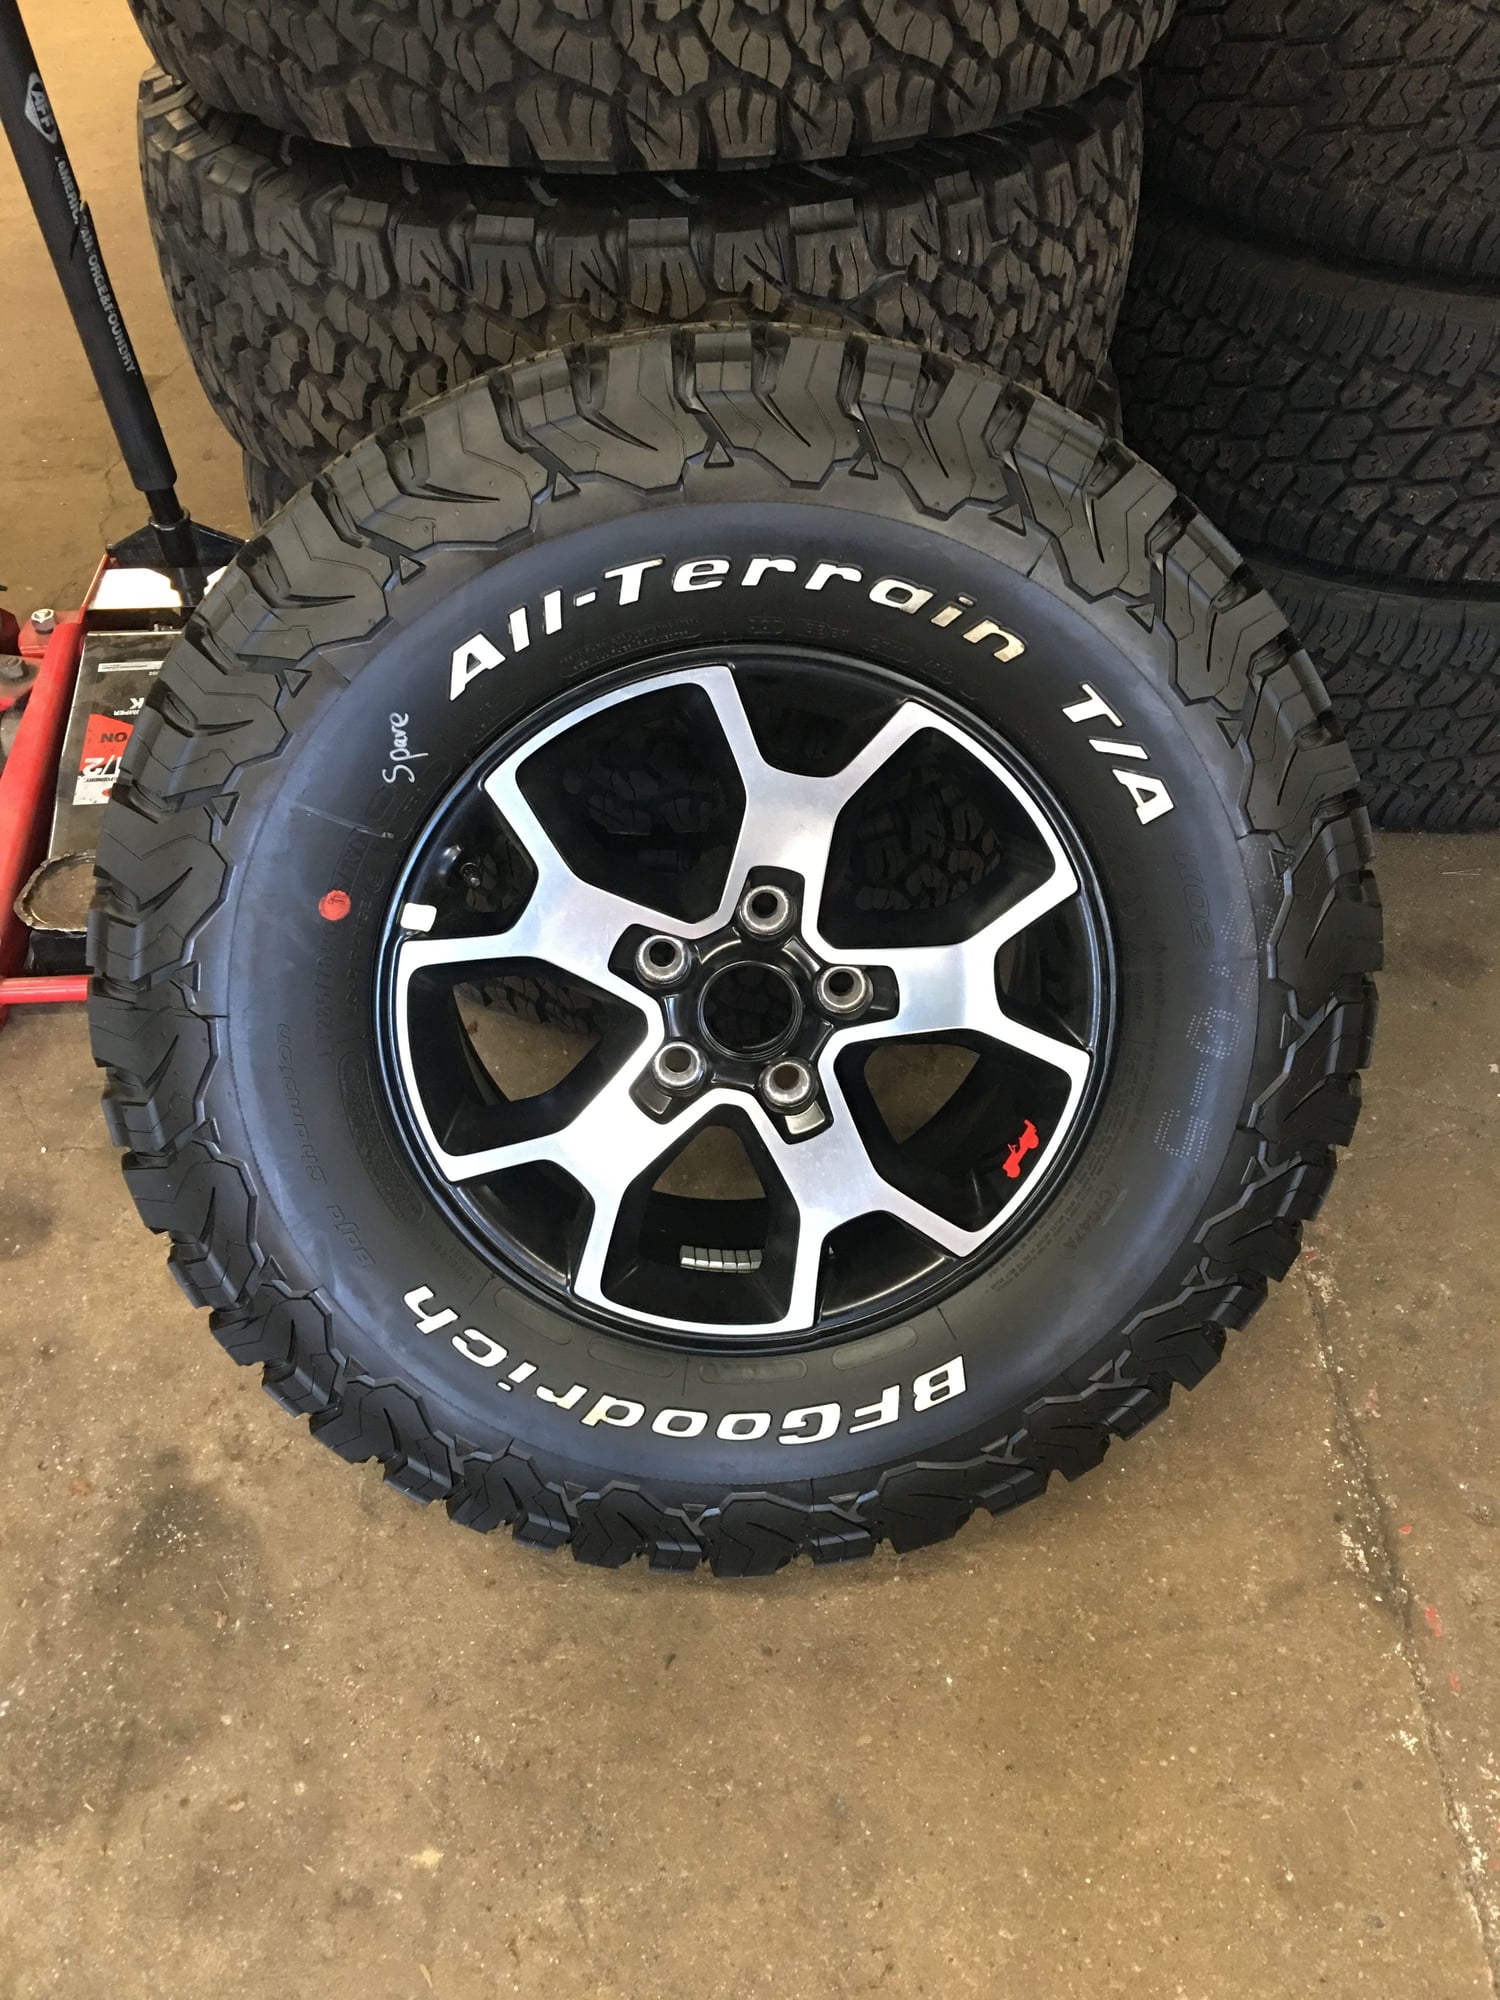 2019 Rubicon wheels and tires - JK-Forum.com - The top destination for